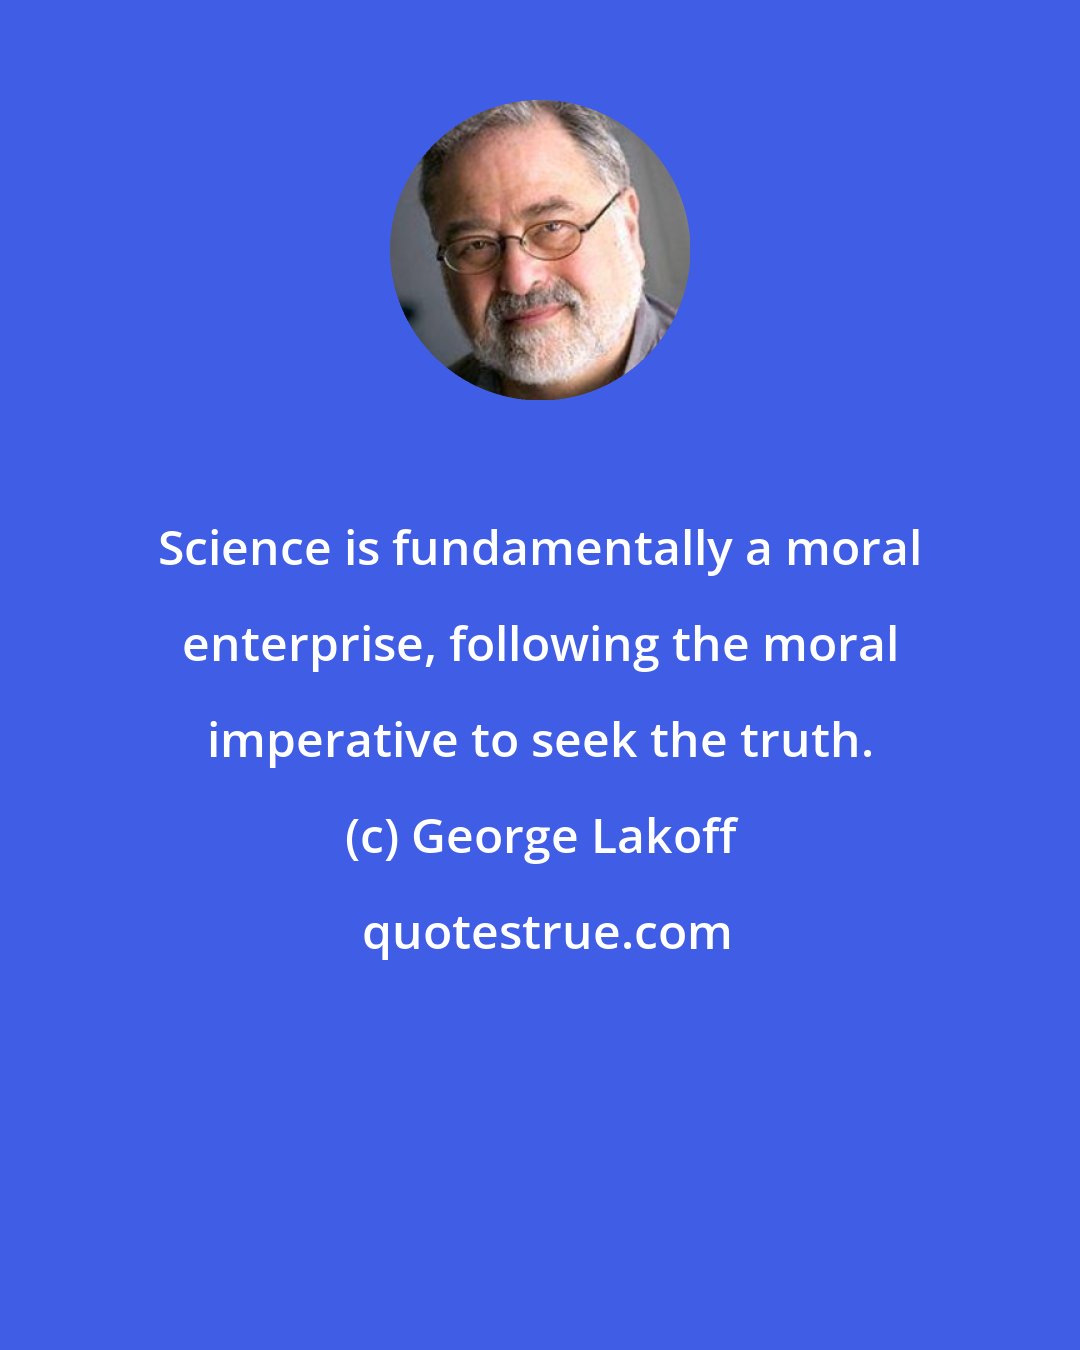 George Lakoff: Science is fundamentally a moral enterprise, following the moral imperative to seek the truth.